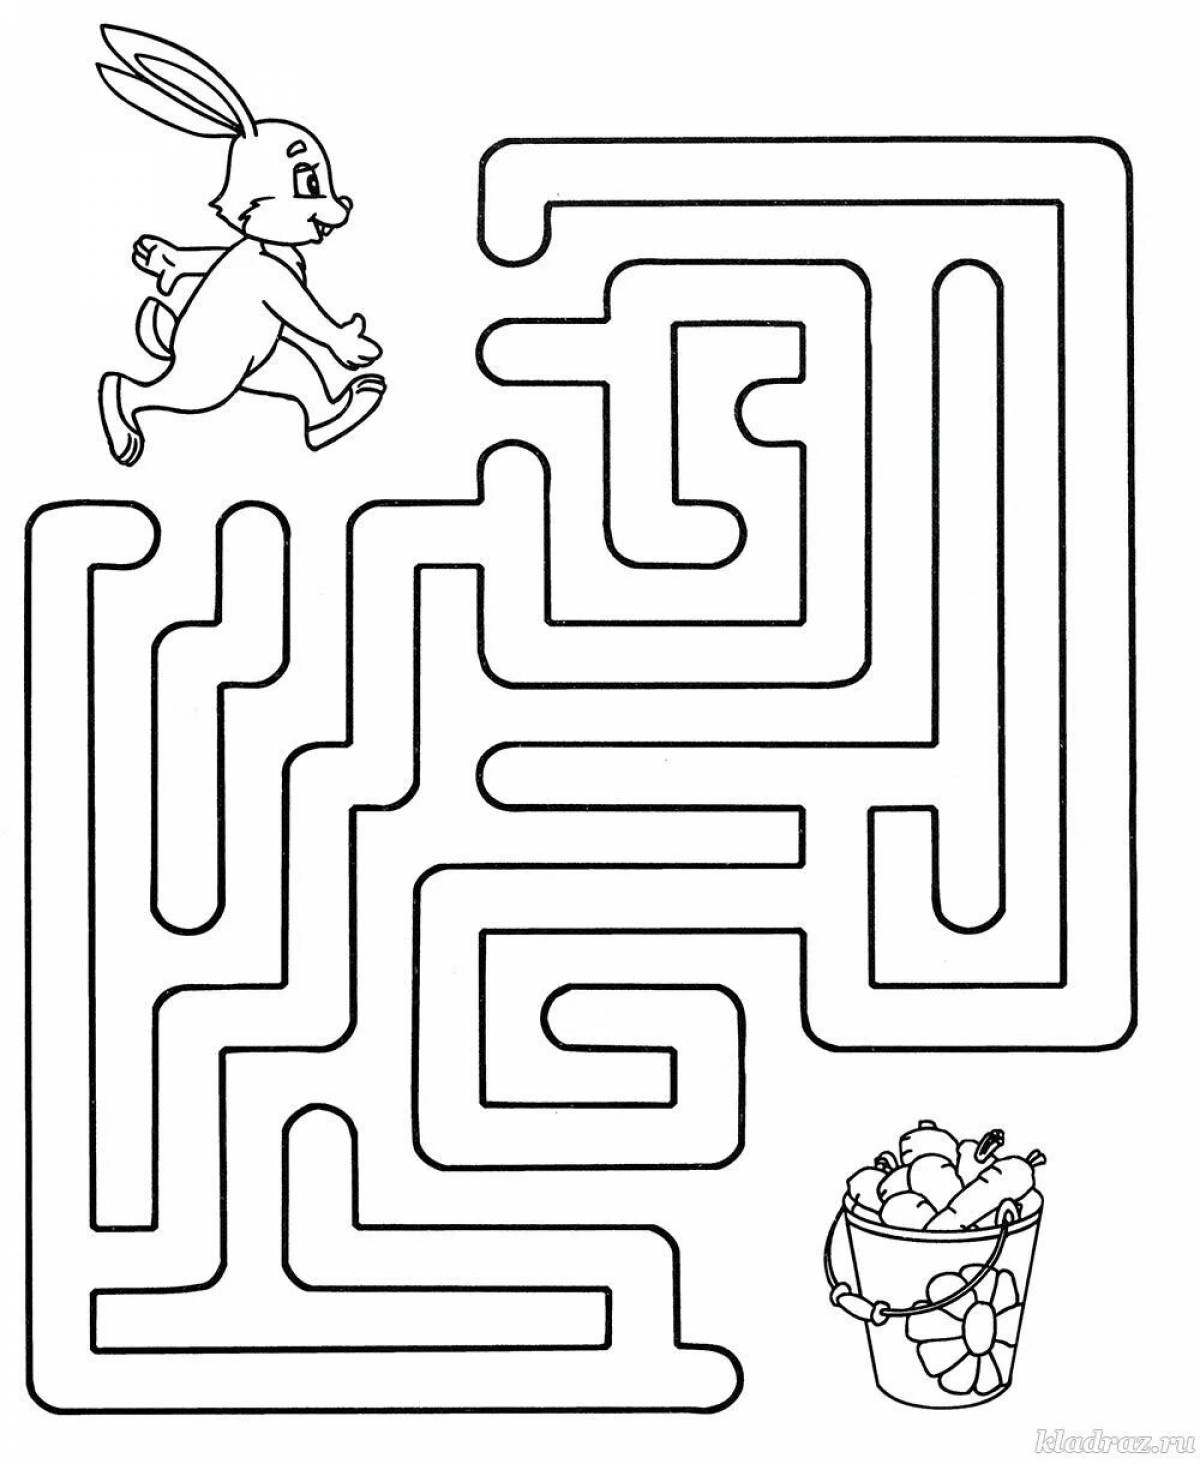 Maze for children 3 4 years old #9